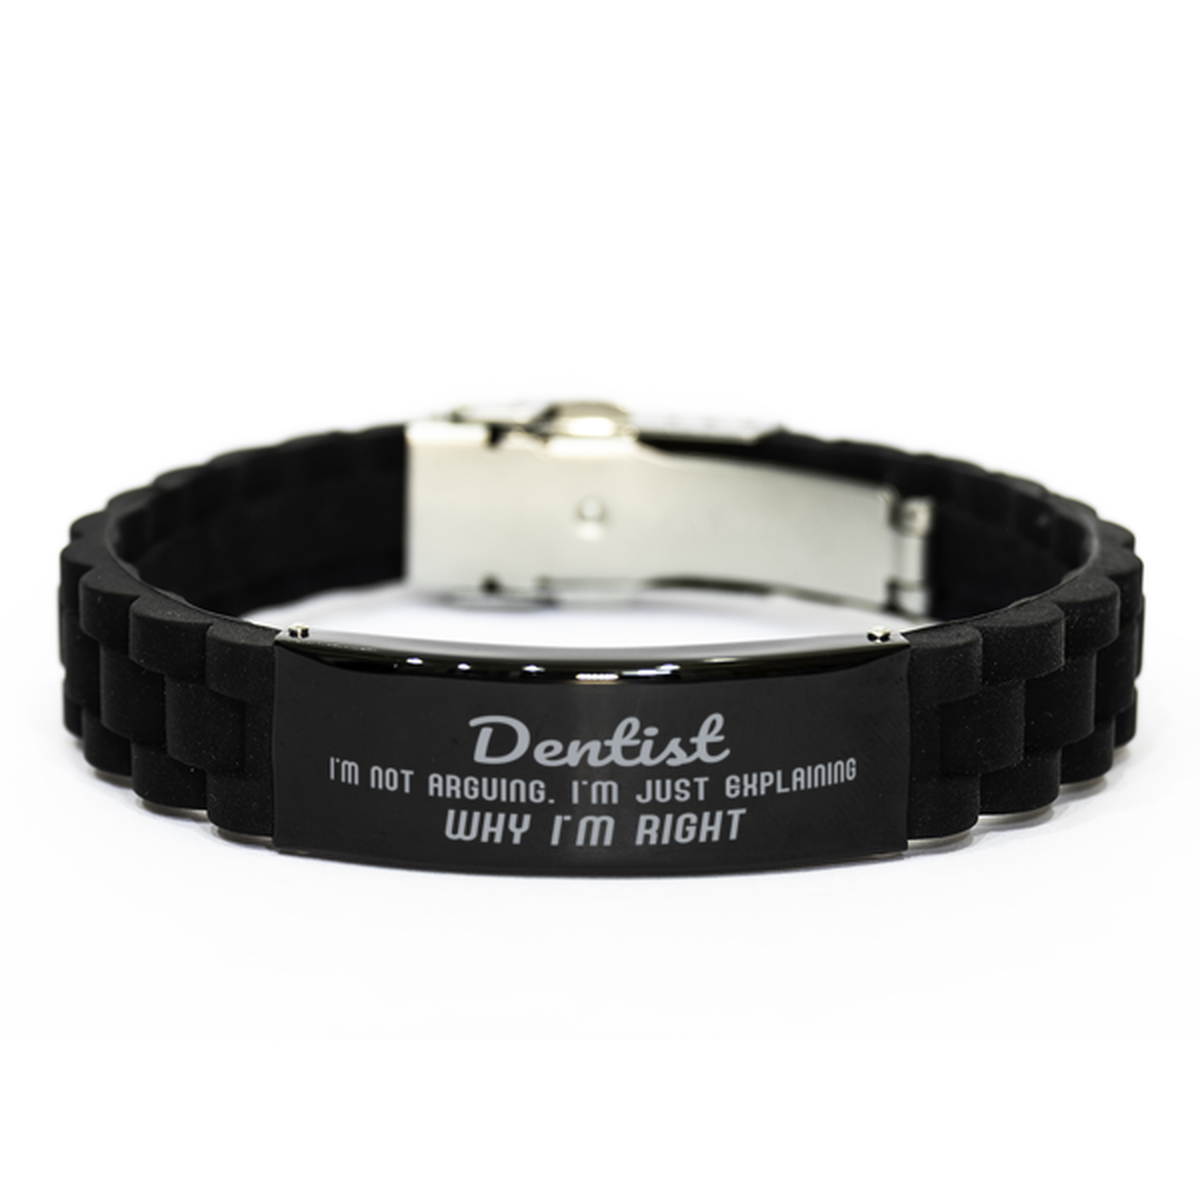 Dentist I'm not Arguing. I'm Just Explaining Why I'm RIGHT Black Glidelock Clasp Bracelet, Funny Saying Quote Dentist Gifts For Dentist Graduation Birthday Christmas Gifts for Men Women Coworker